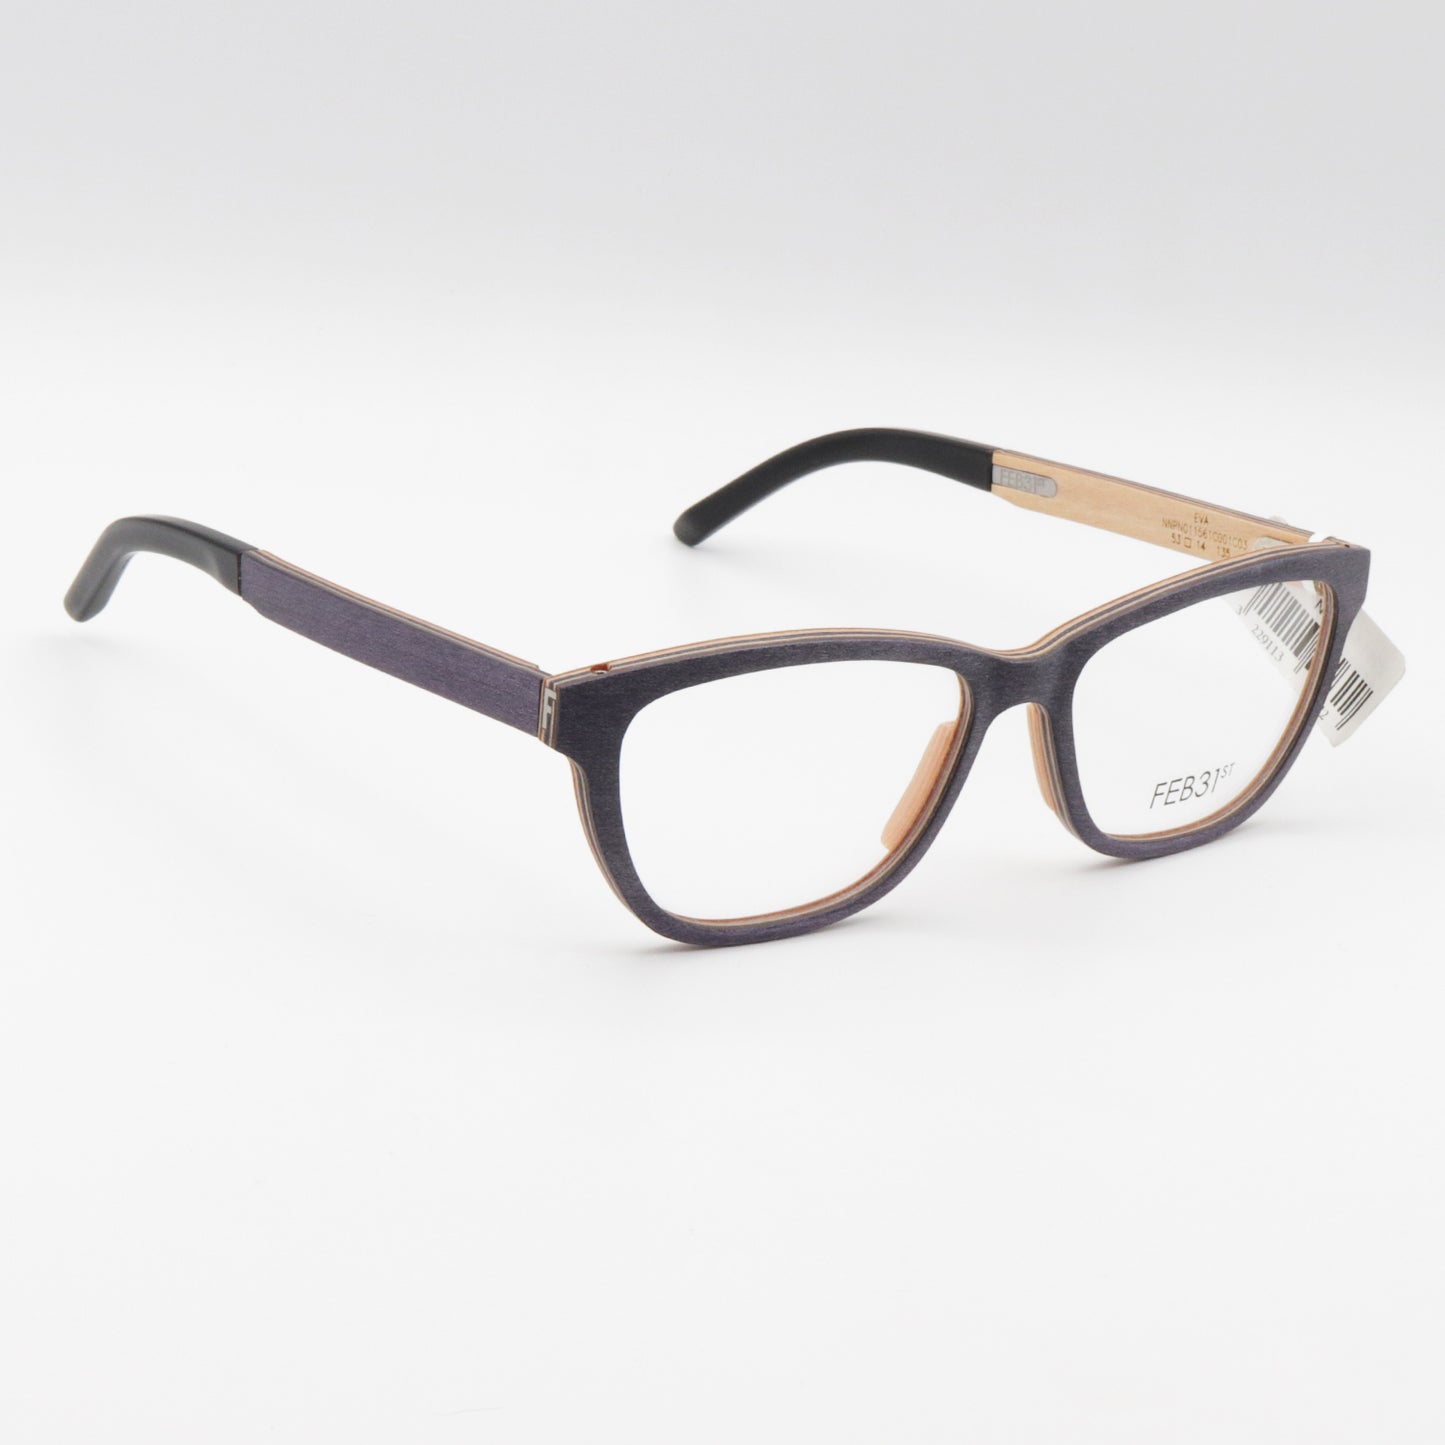 Eva by FEB31st wooden glasses Purple and Beige